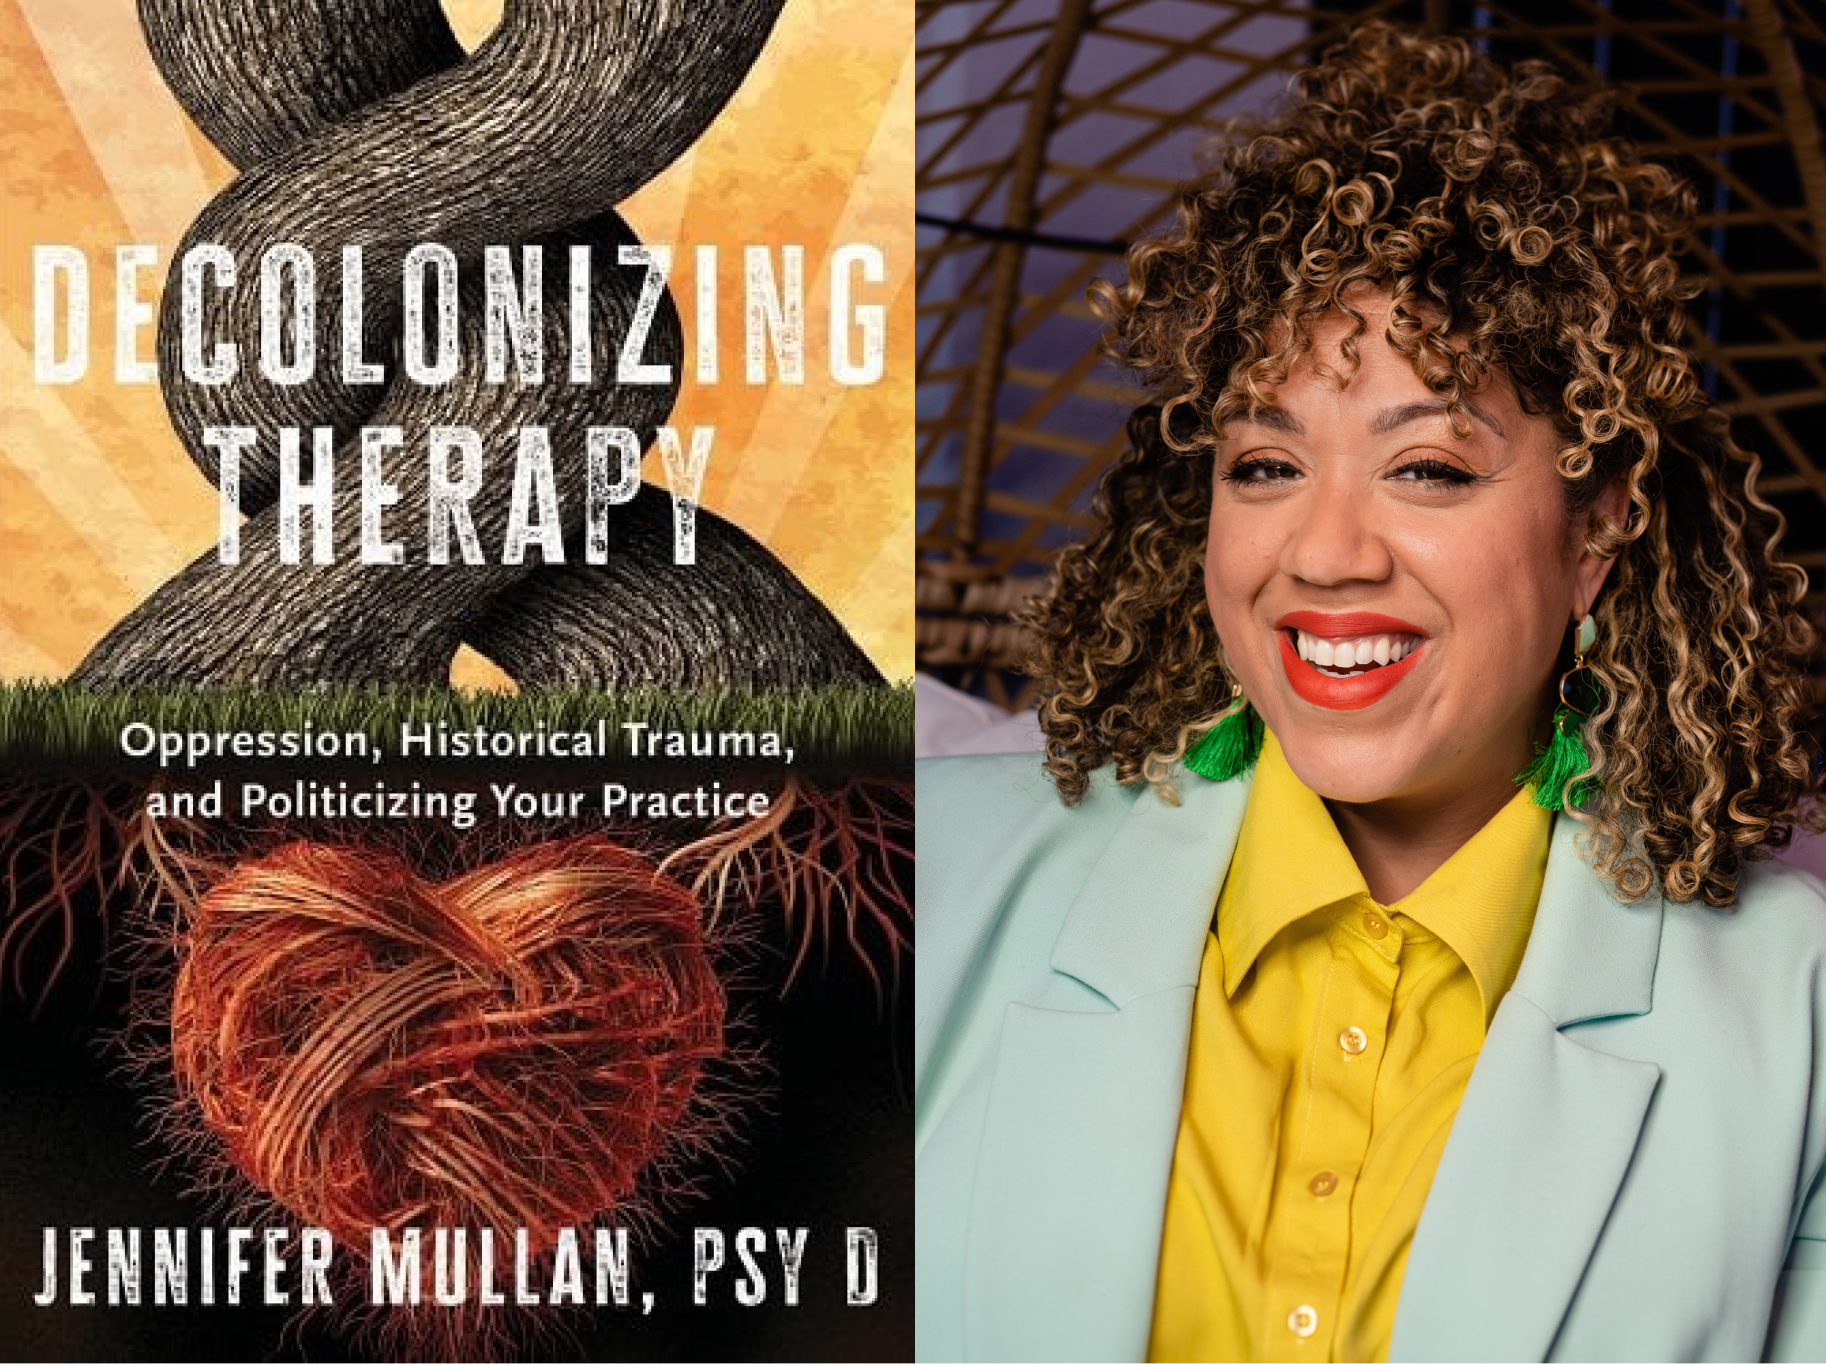 Article image for: On Decolonizing Therapy: A Reading List from Dr. Jennifer Mullan